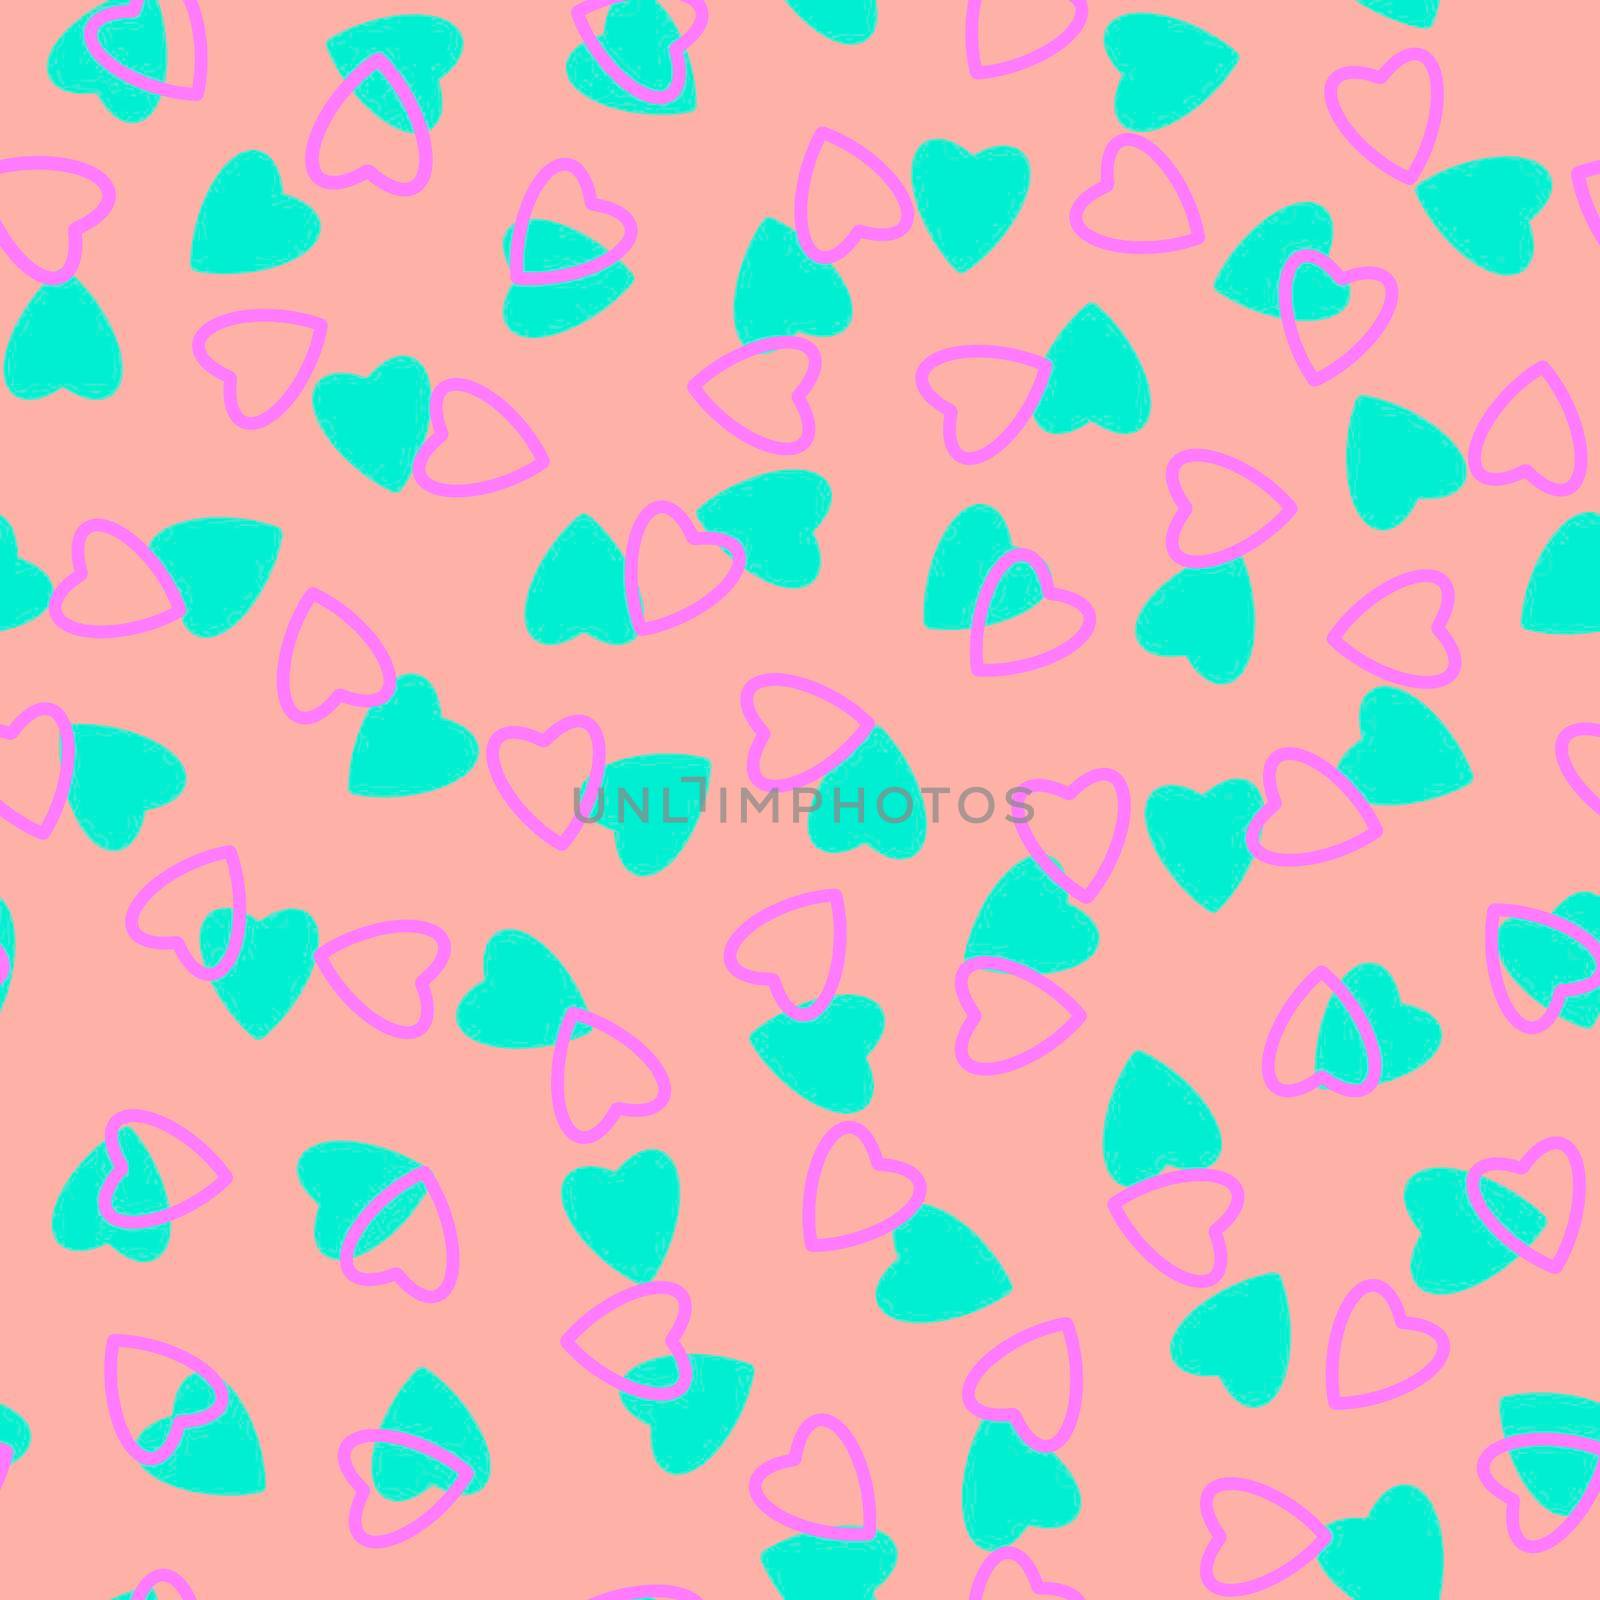 Simple hearts seamless pattern,endless chaotic texture made of tiny heart silhouettes.Valentines,mothers day background.Great for Easter,wedding,scrapbook,gift wrapping paper,textiles.Azure on pink.